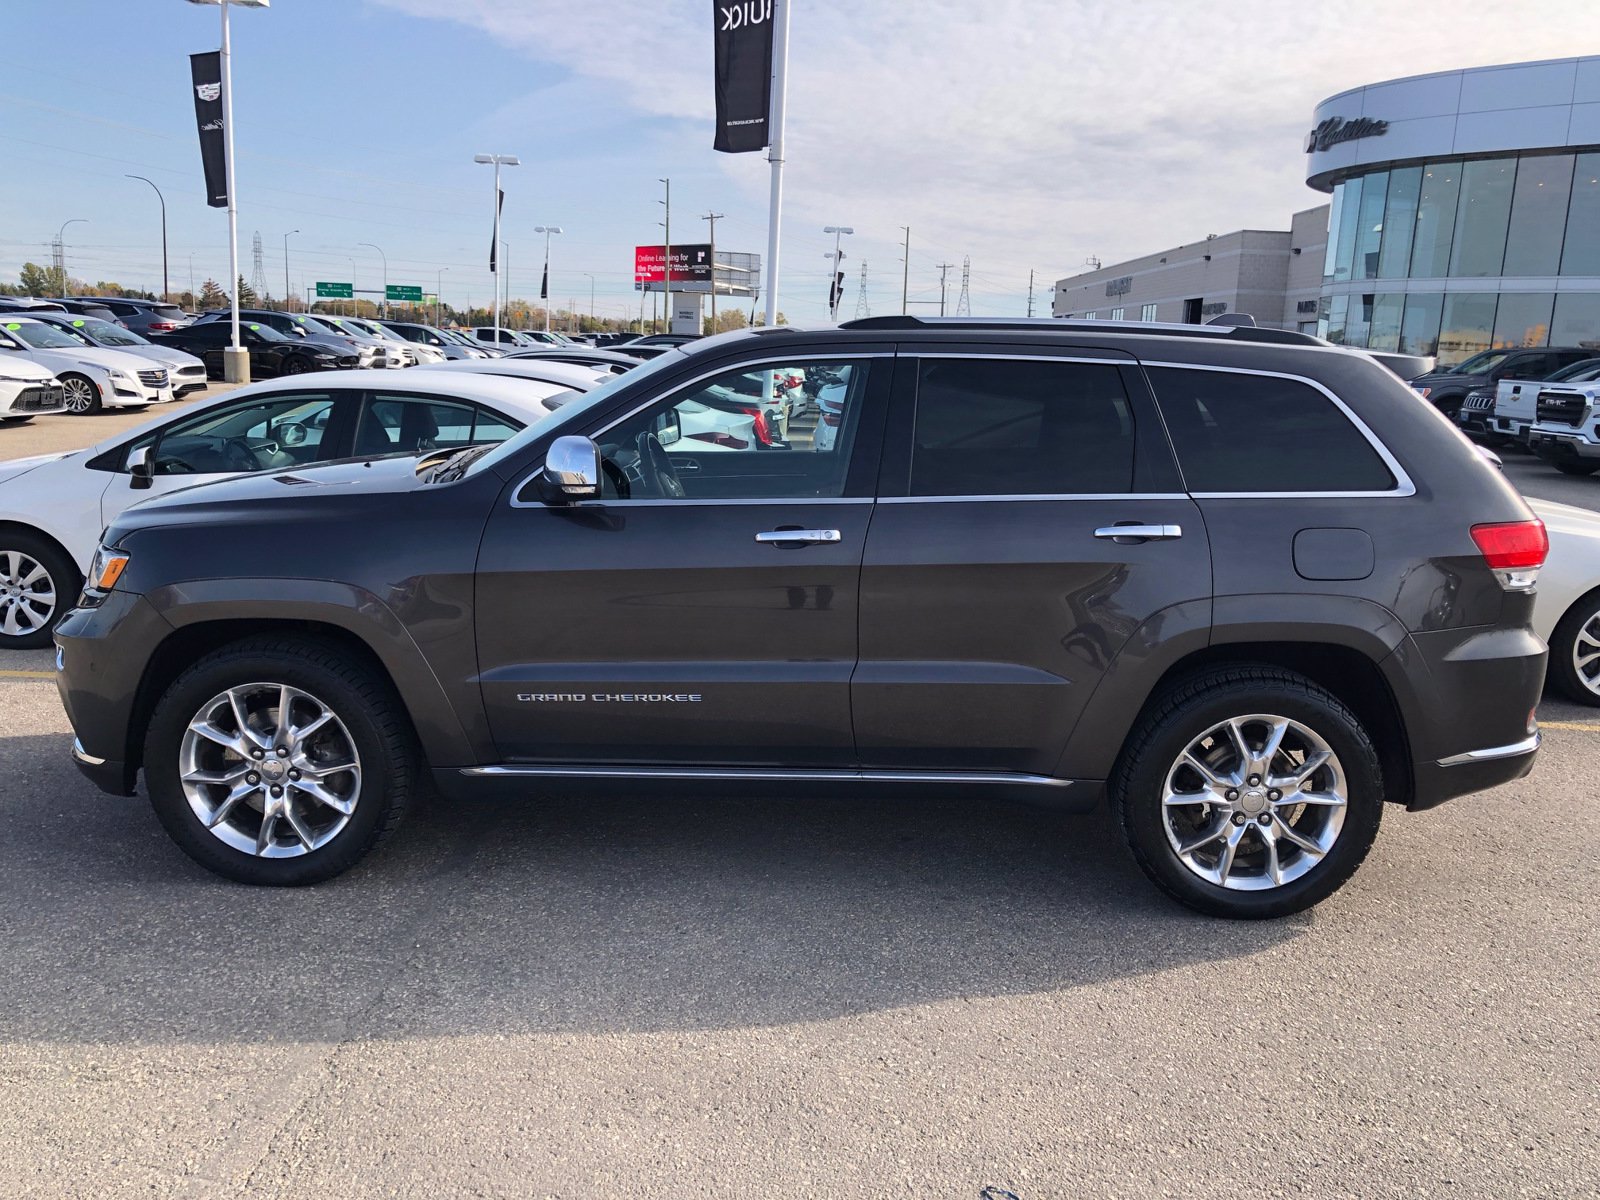 Certified PreOwned 2015 Jeep Grand Cherokee Summit 5.7L